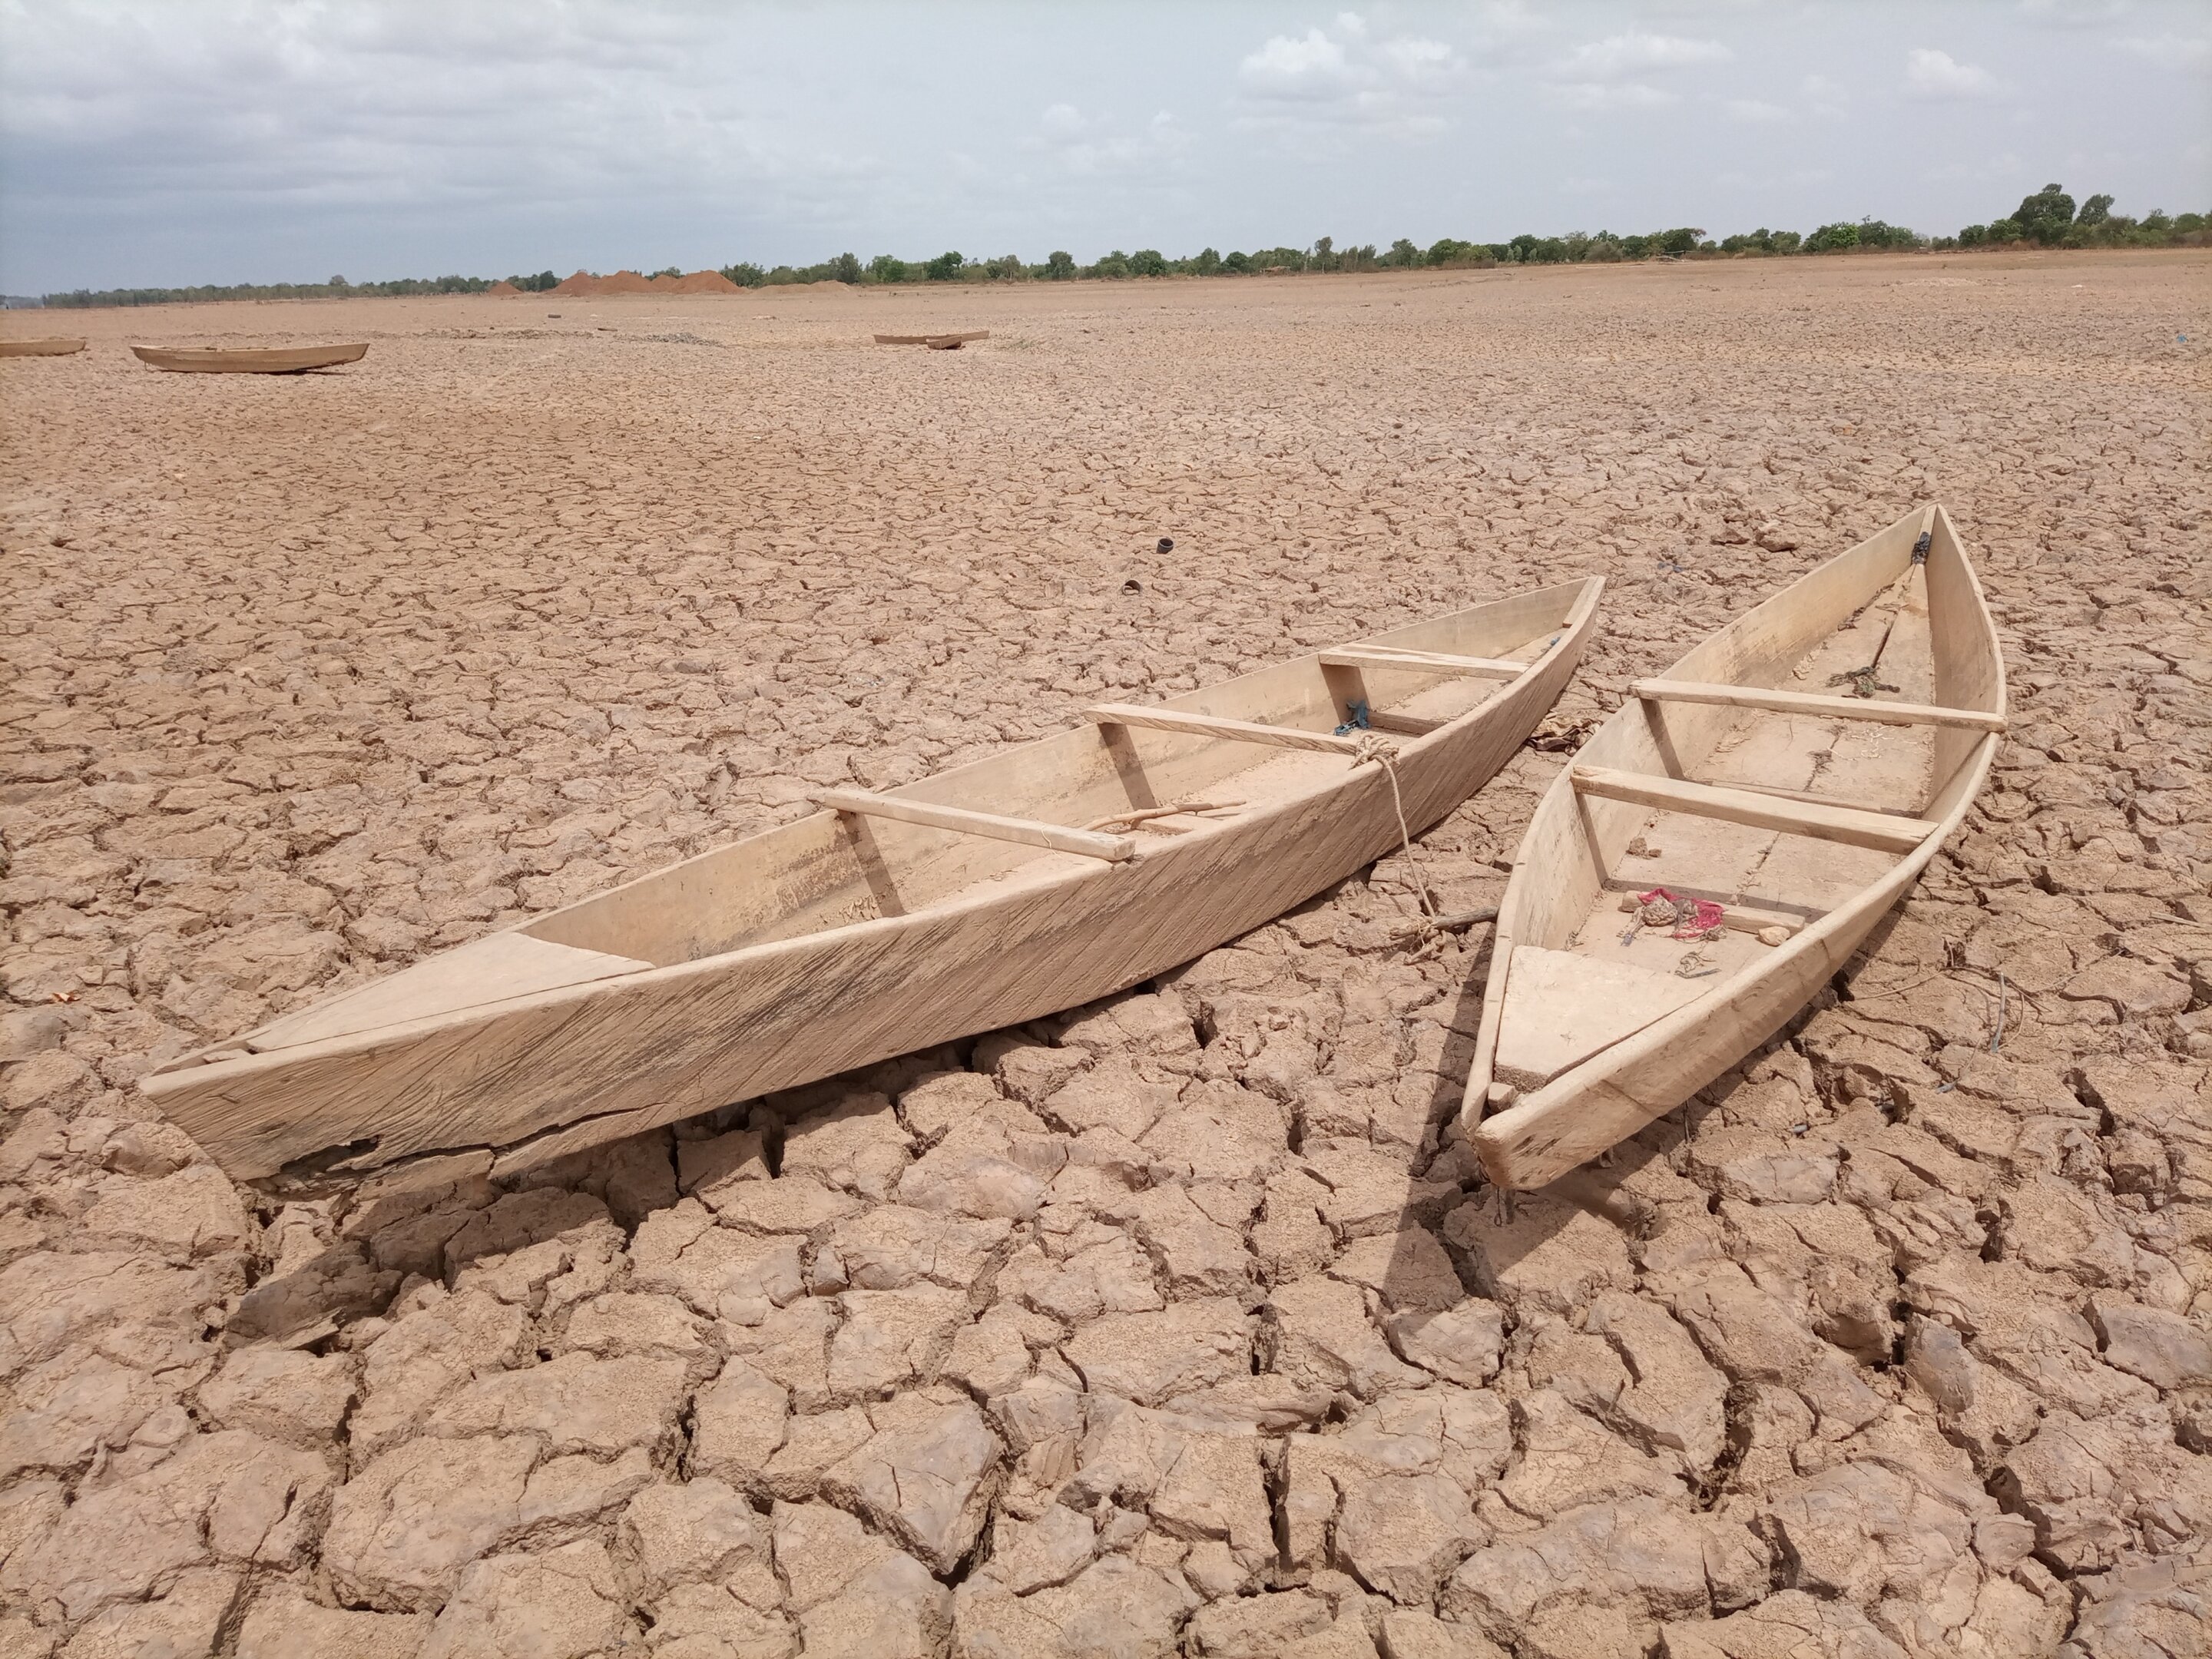 Human actions accelerate climate-driven floods and droughts